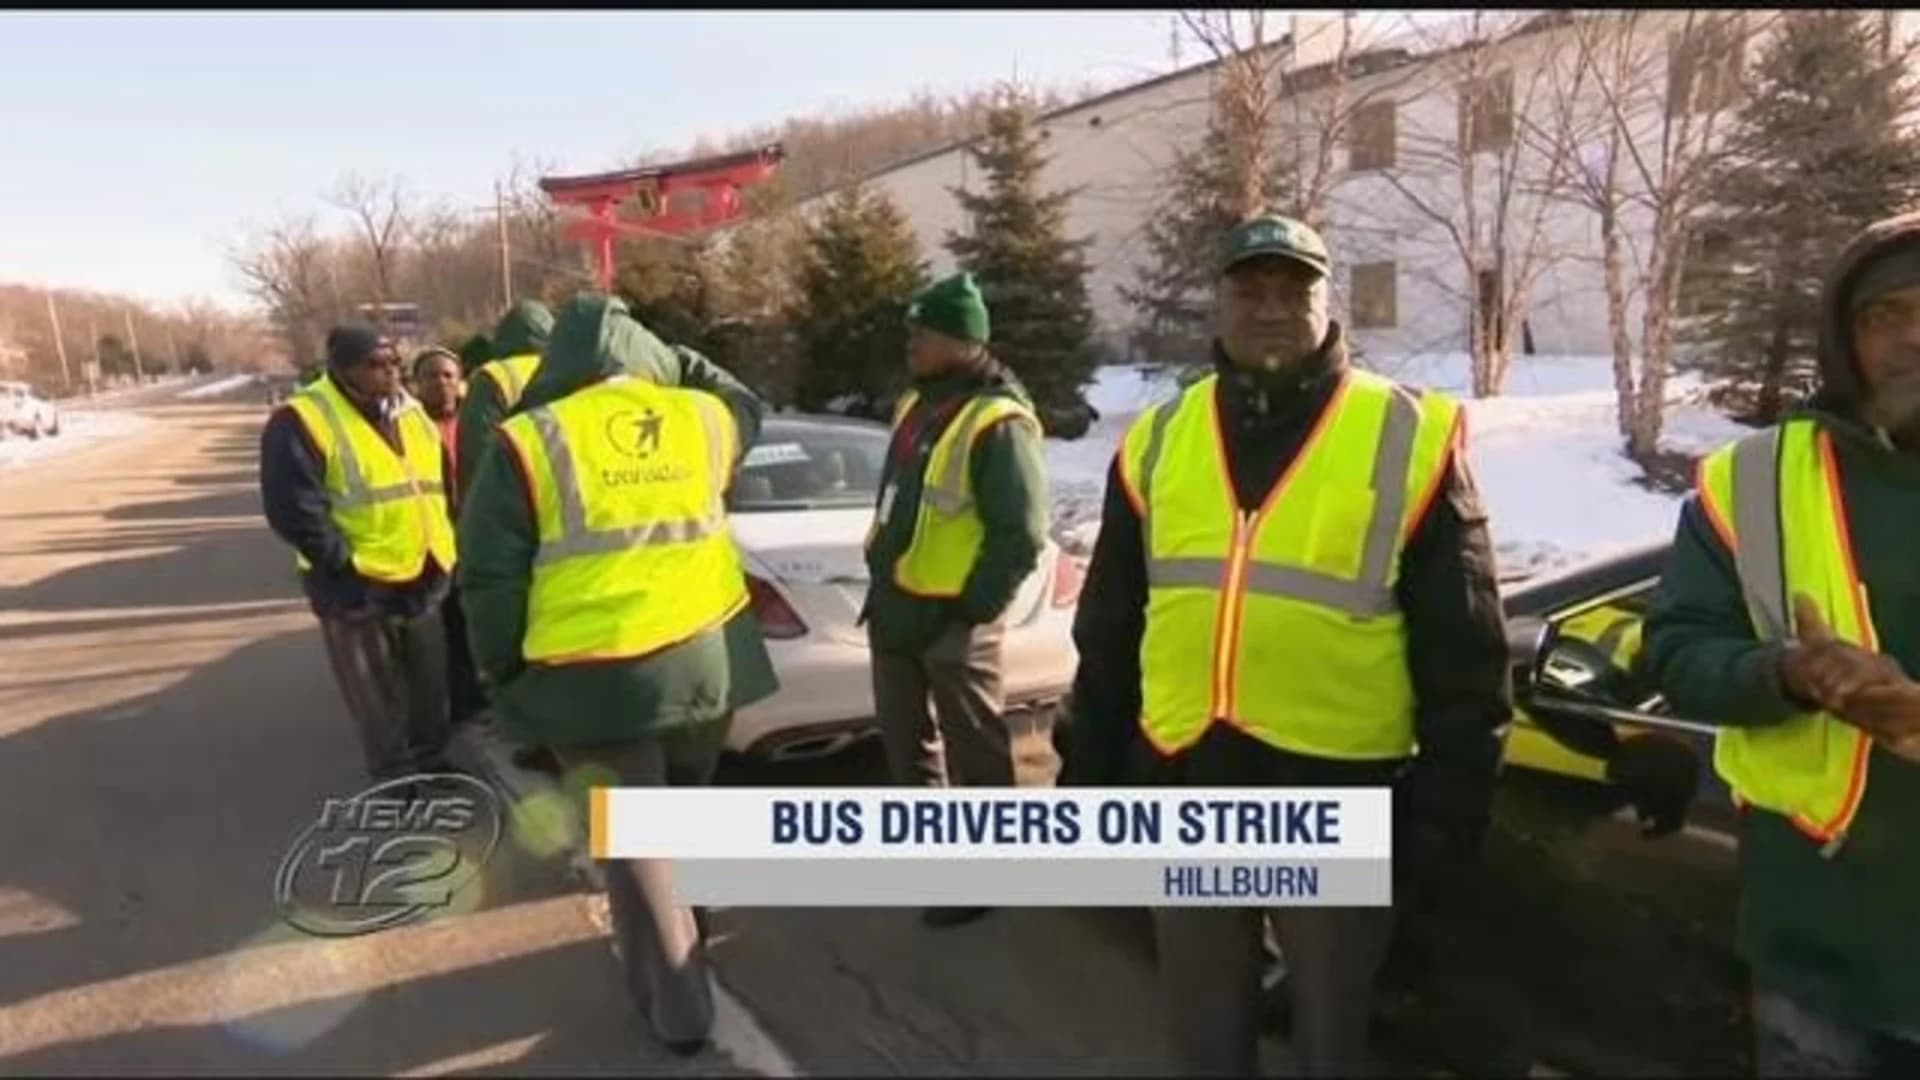 ‘We just want our due’: Bus drivers strike for better wages, benefits